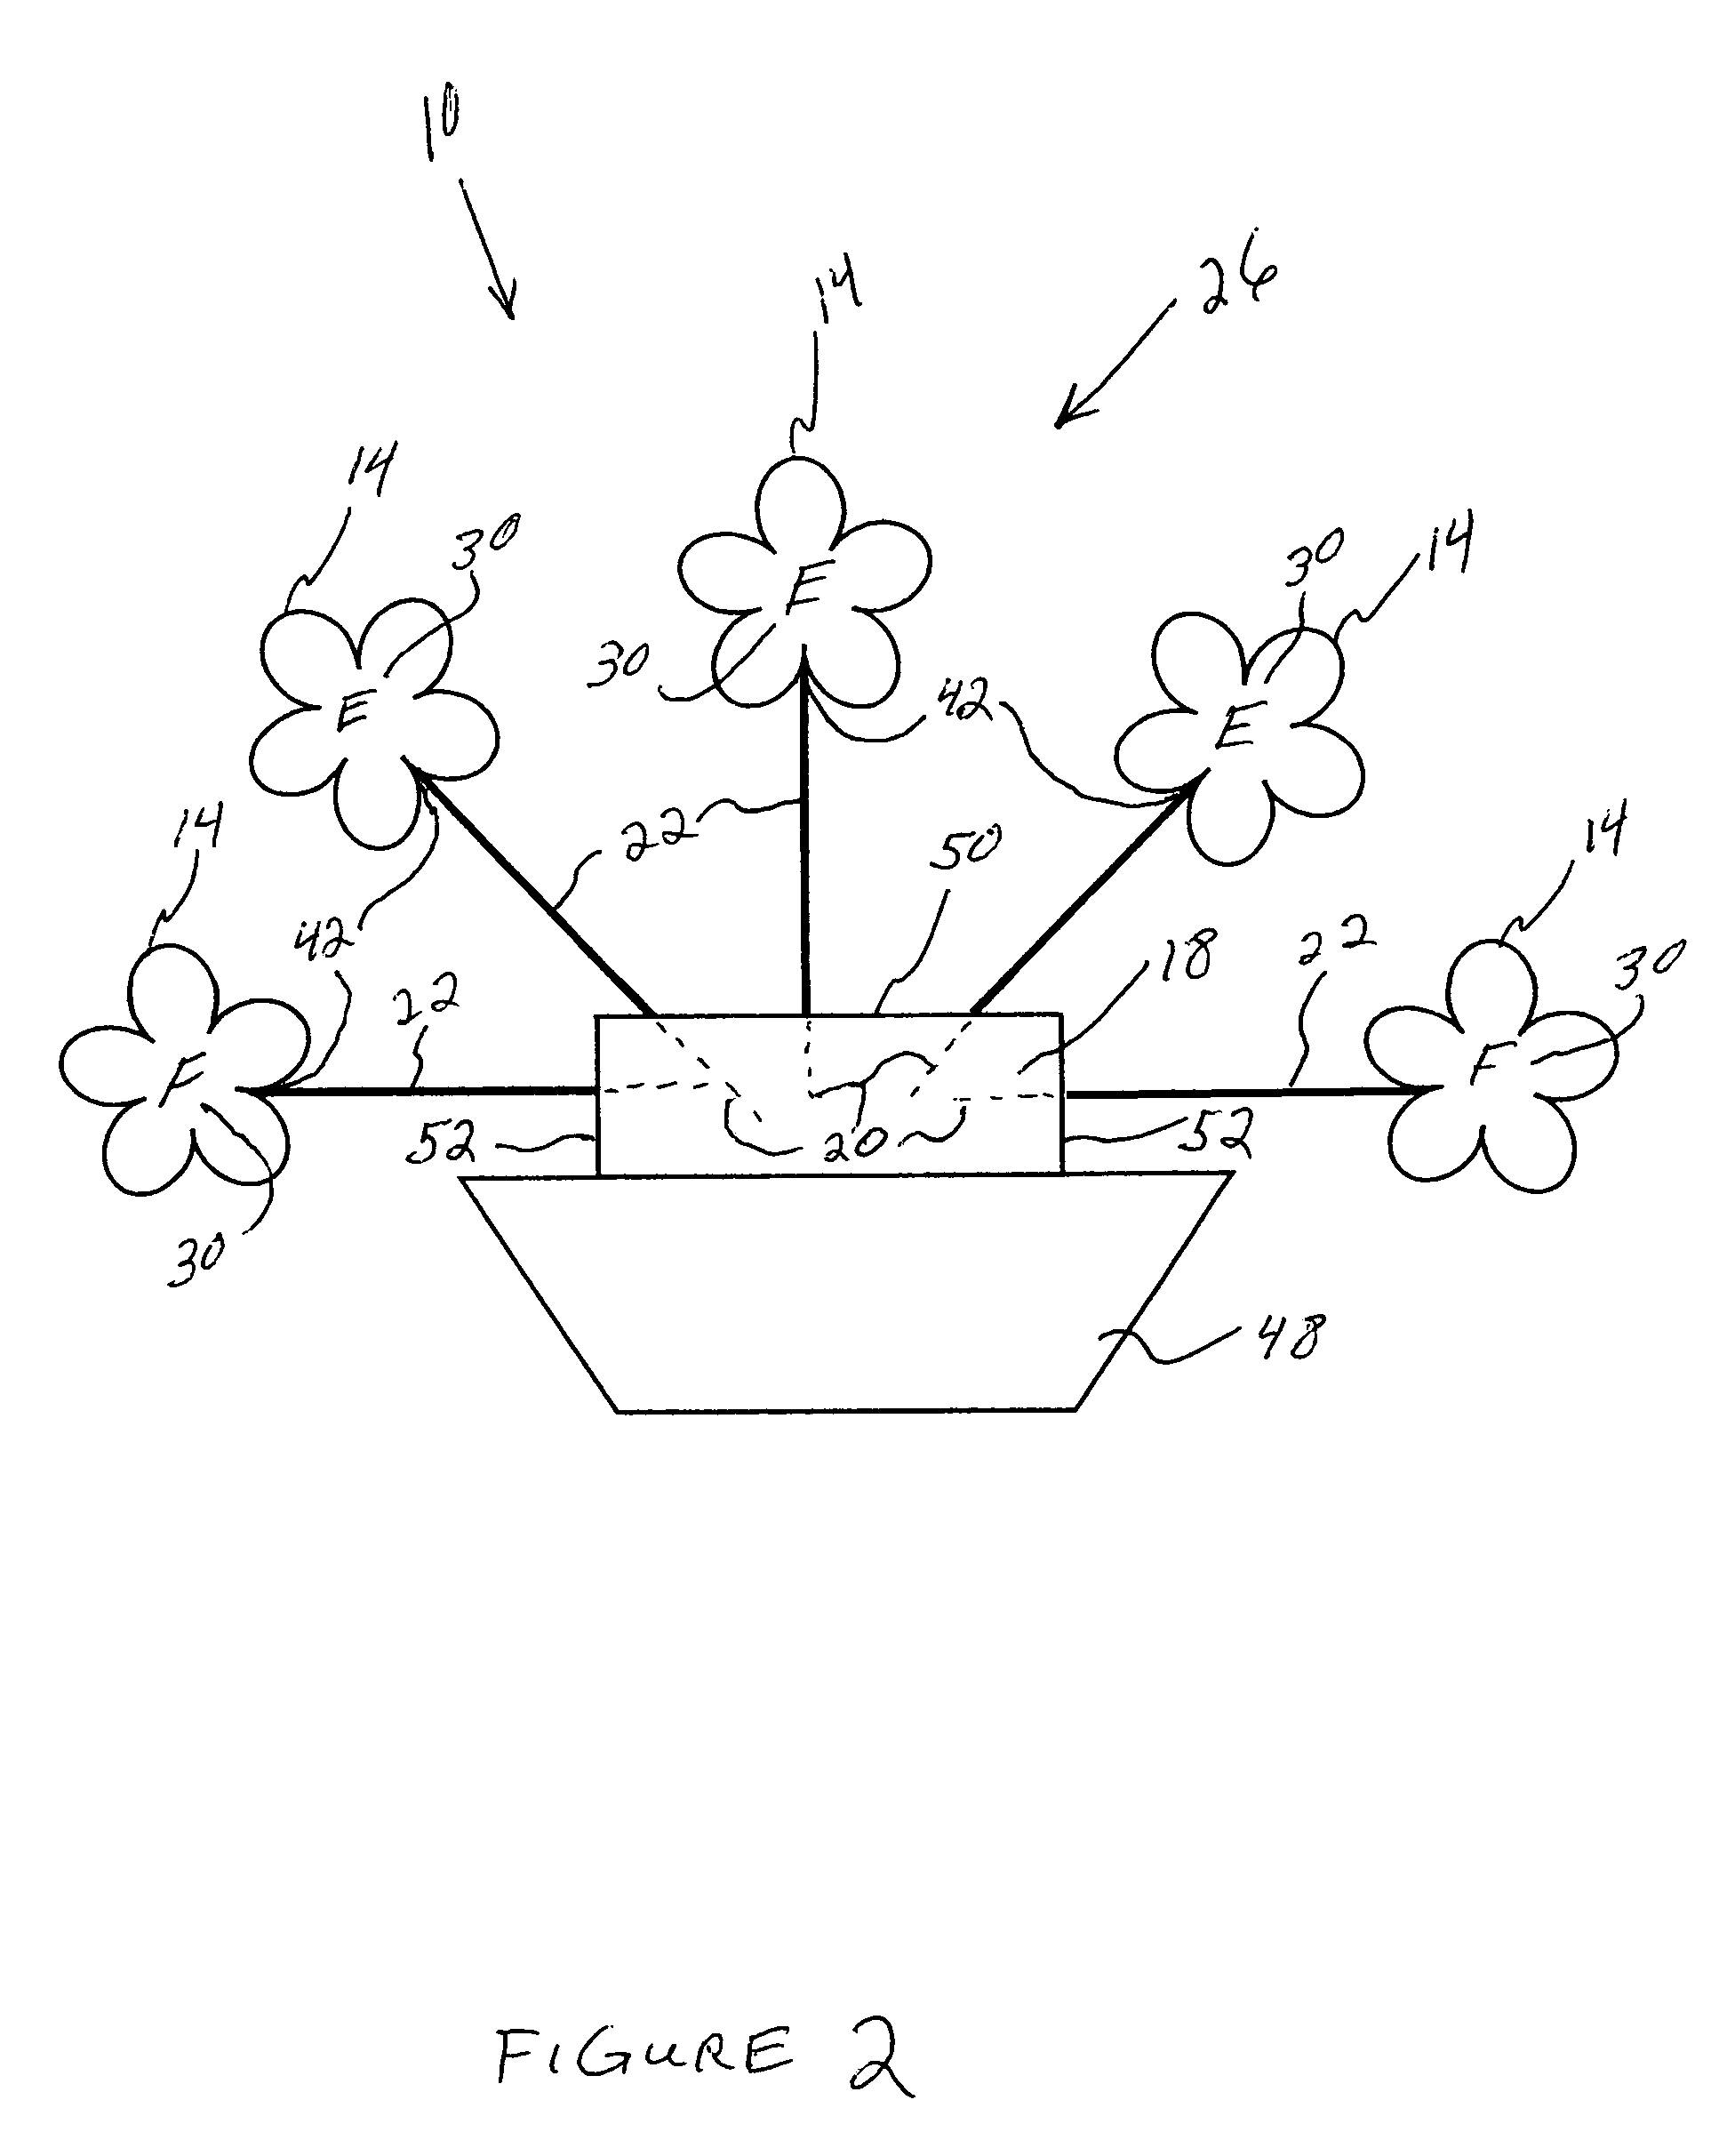 Device and method for arranging flowers